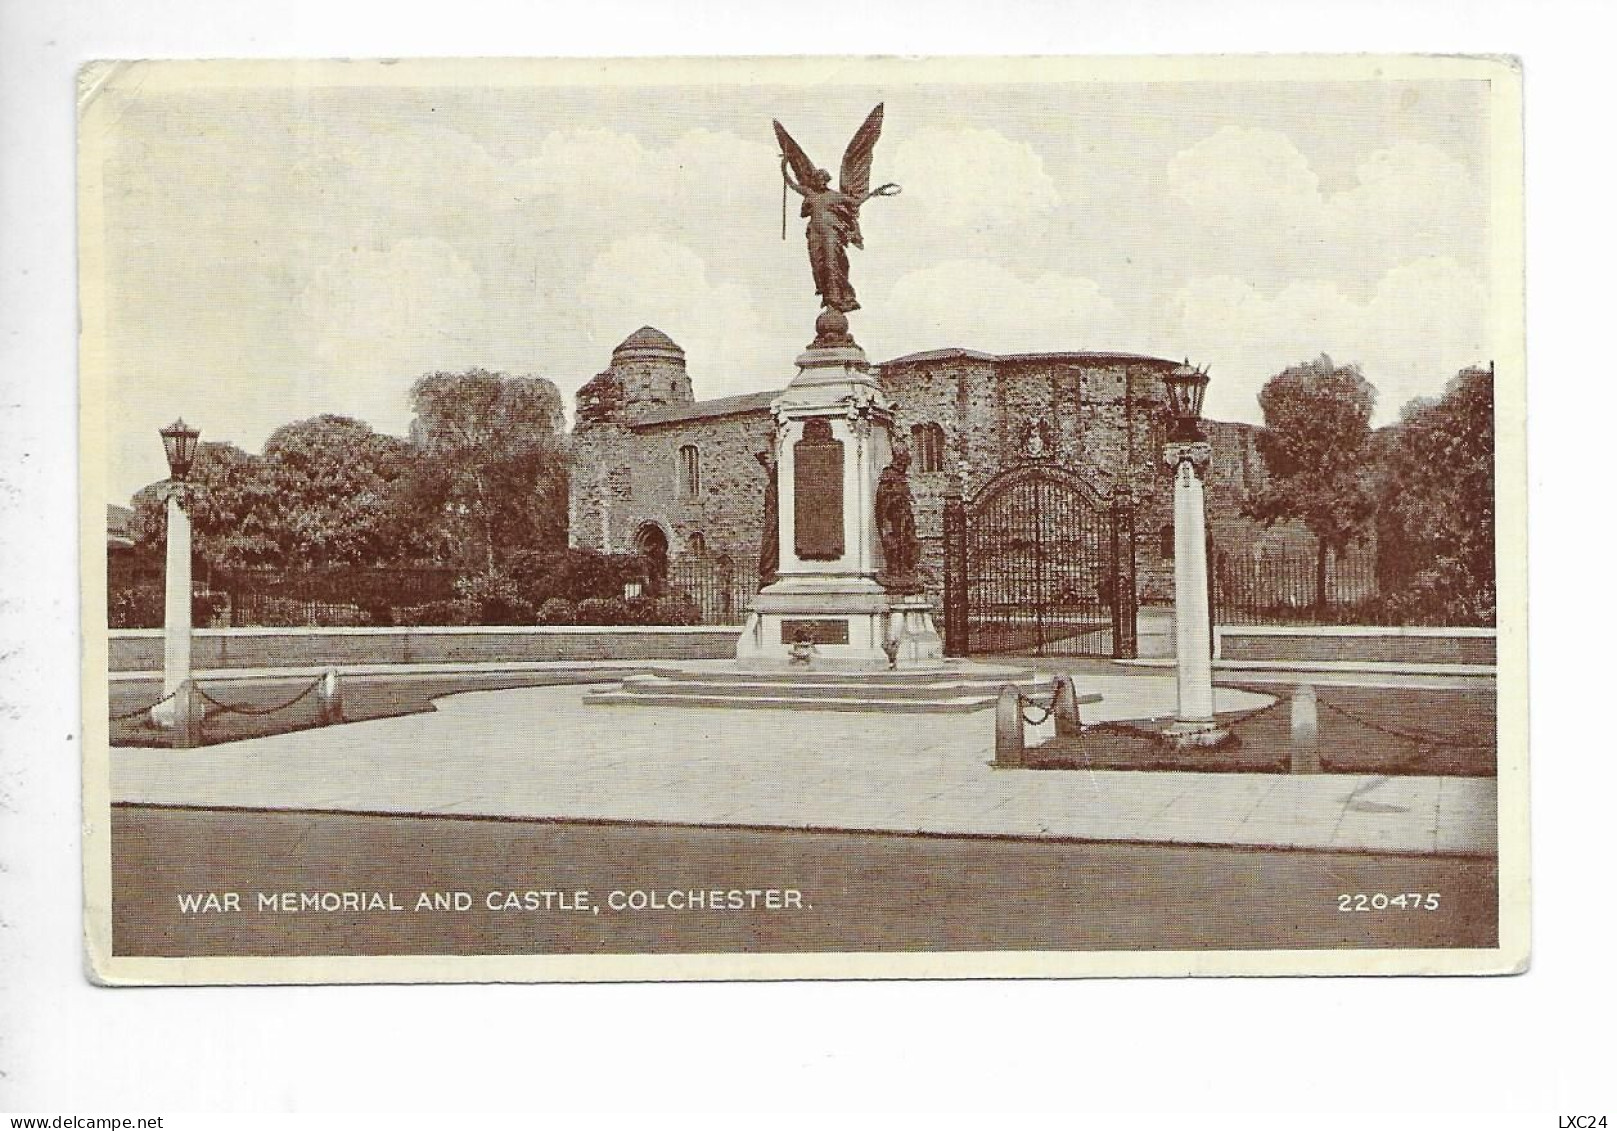 COLCHESTER. WAR MEMORIAL AND CASTLE. - Colchester